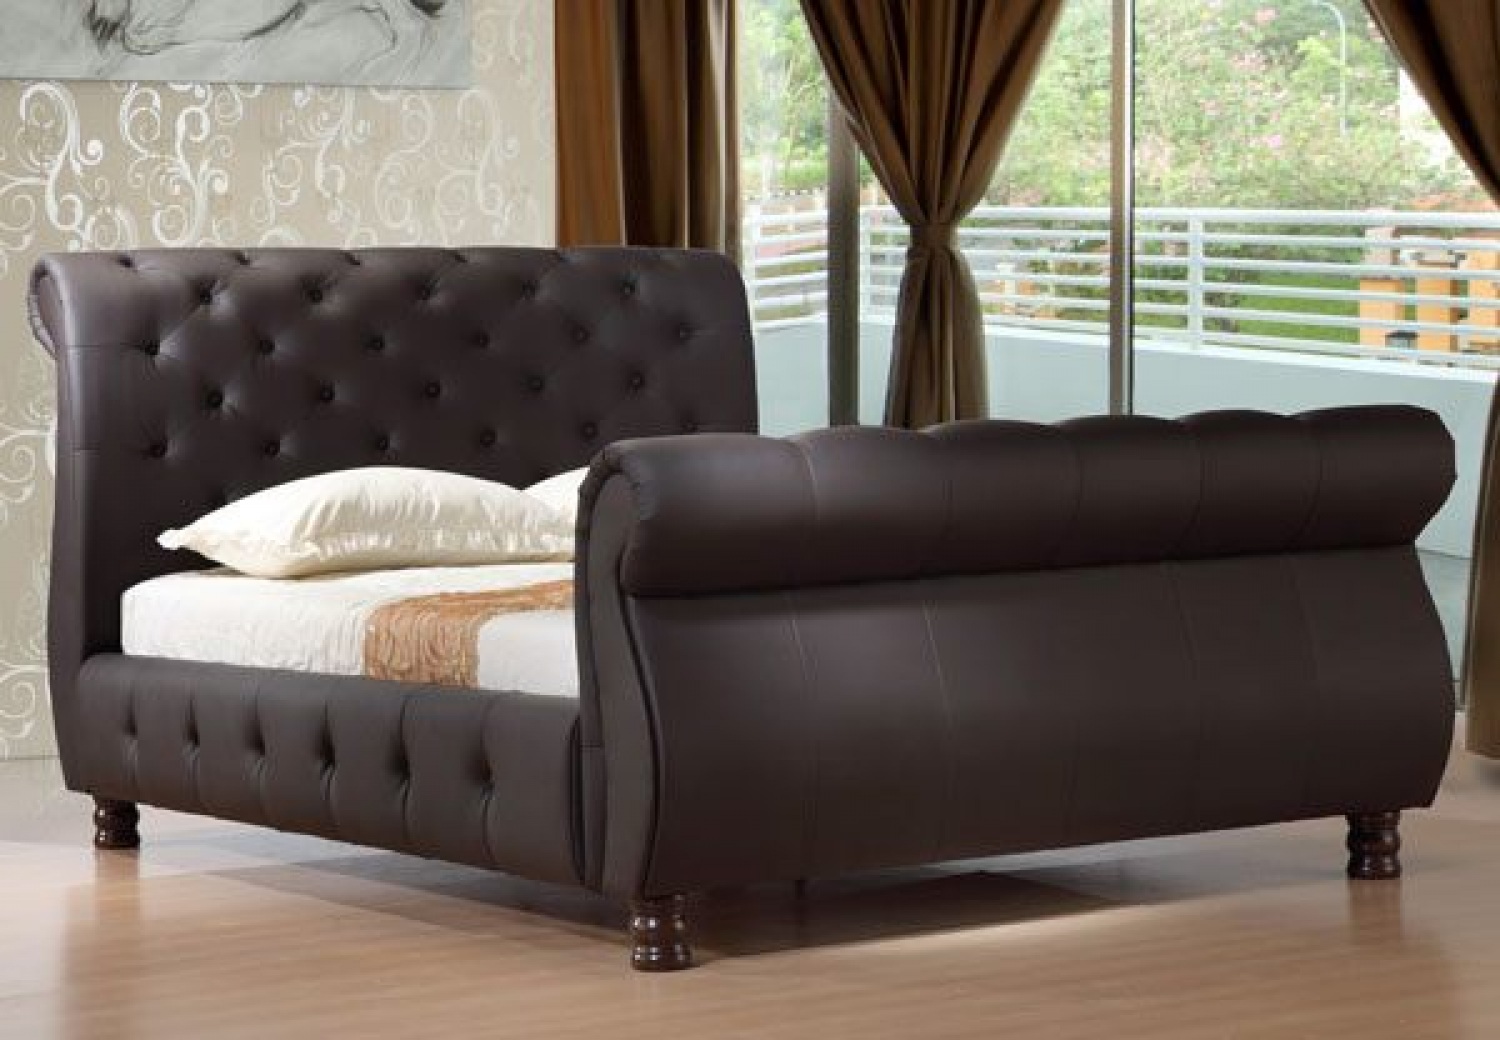 birlea canterbury leather sleigh bed frame. -Absolute Beds  provide Divan Beds with clever storage Solutions. Mattresses, bases, Headboards sold separately. image